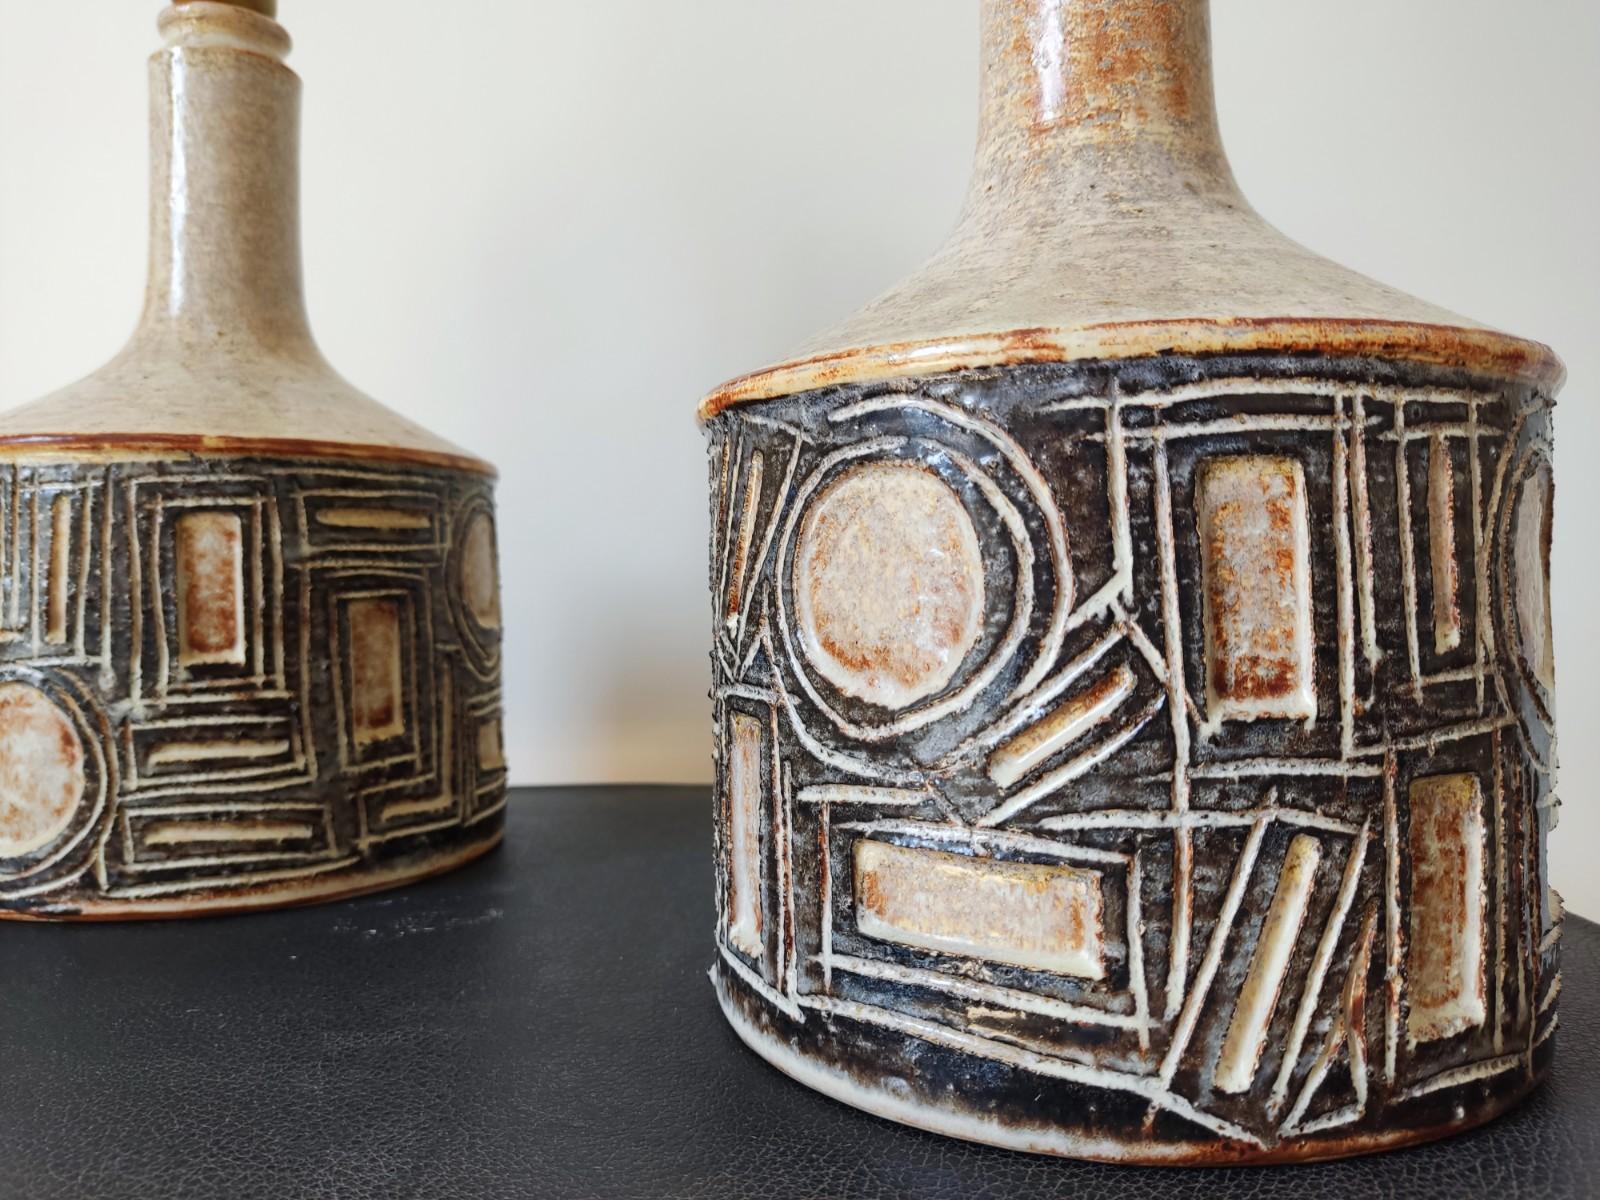 Rare pair of Danish ceramic lamps by Jette Helleroe
The lamps are made of beige/orange glazed stoneware and decorated with black abstract geometric figures.
These lamps are a fine example of Jette Hellerøe's very expressive and powerful ceramic